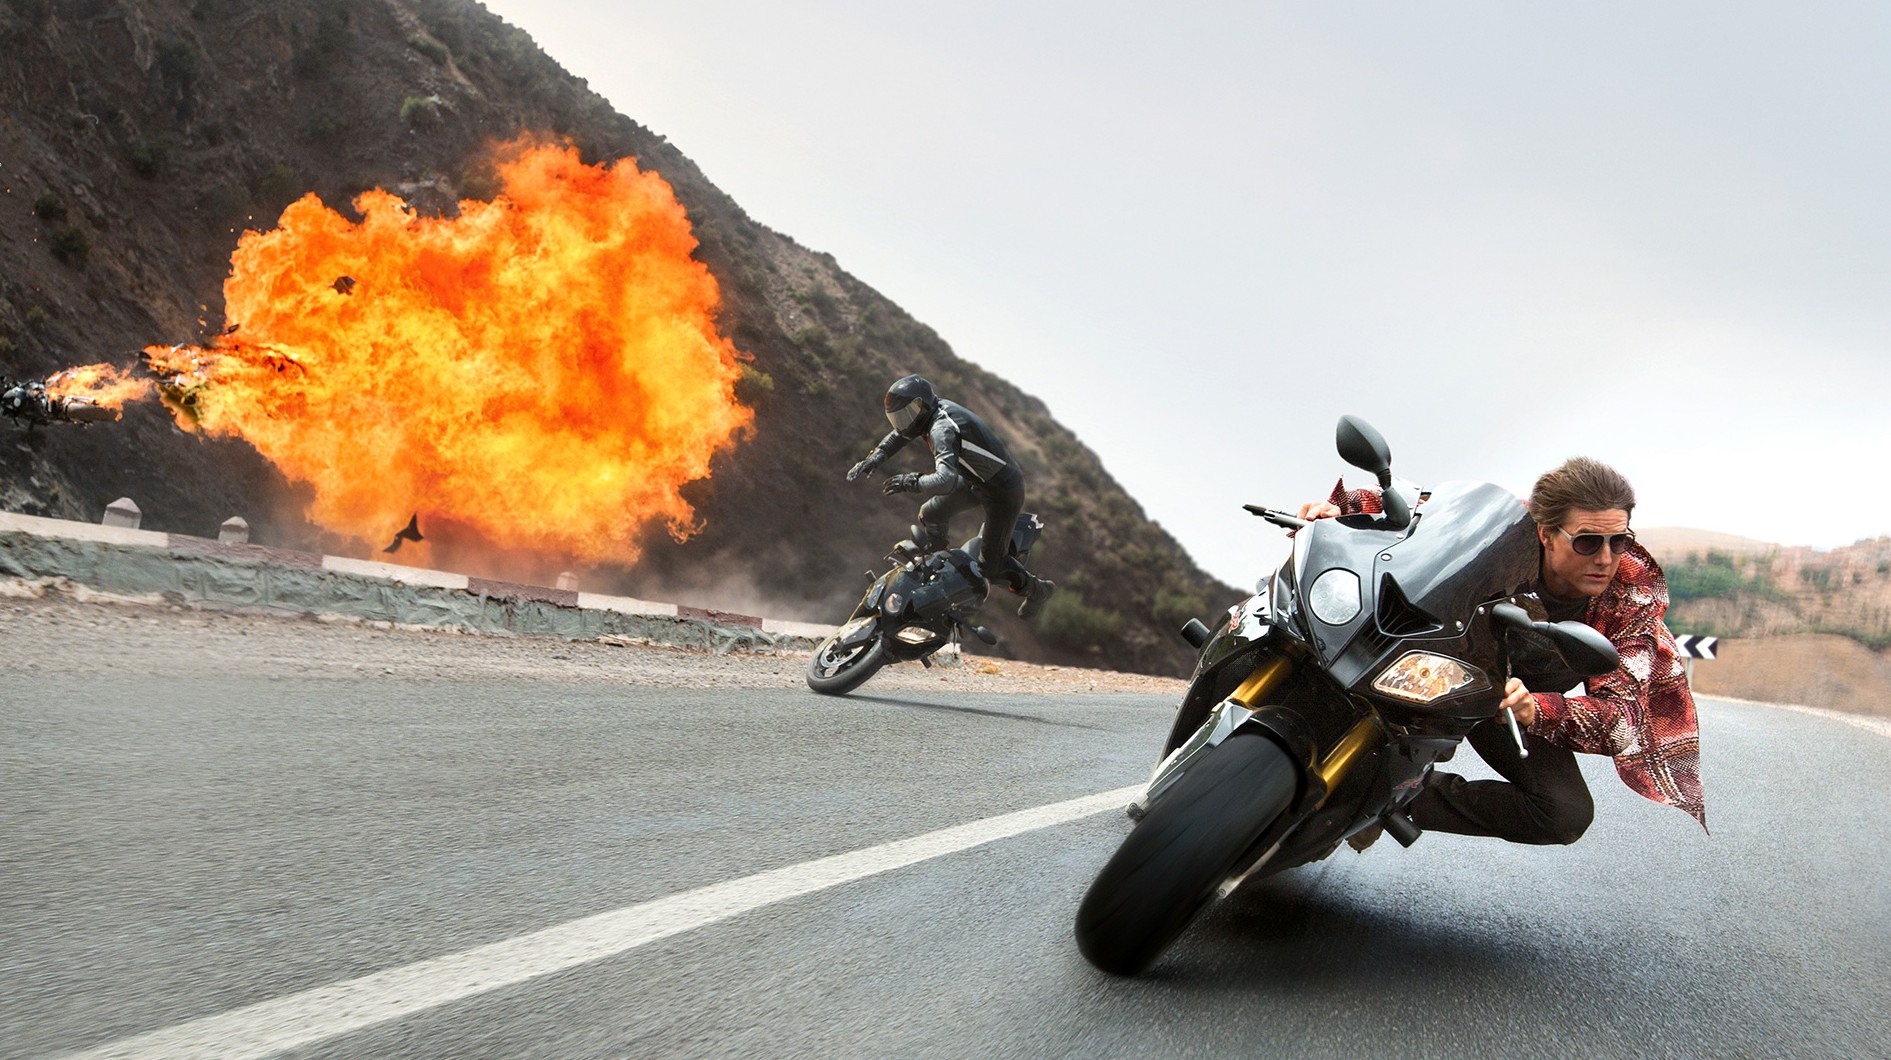 Videophiled: Tom Cruise in ‘Mission: Impossible – Rogue Nation’ and Richard Gere in ‘Time Out of Mind’